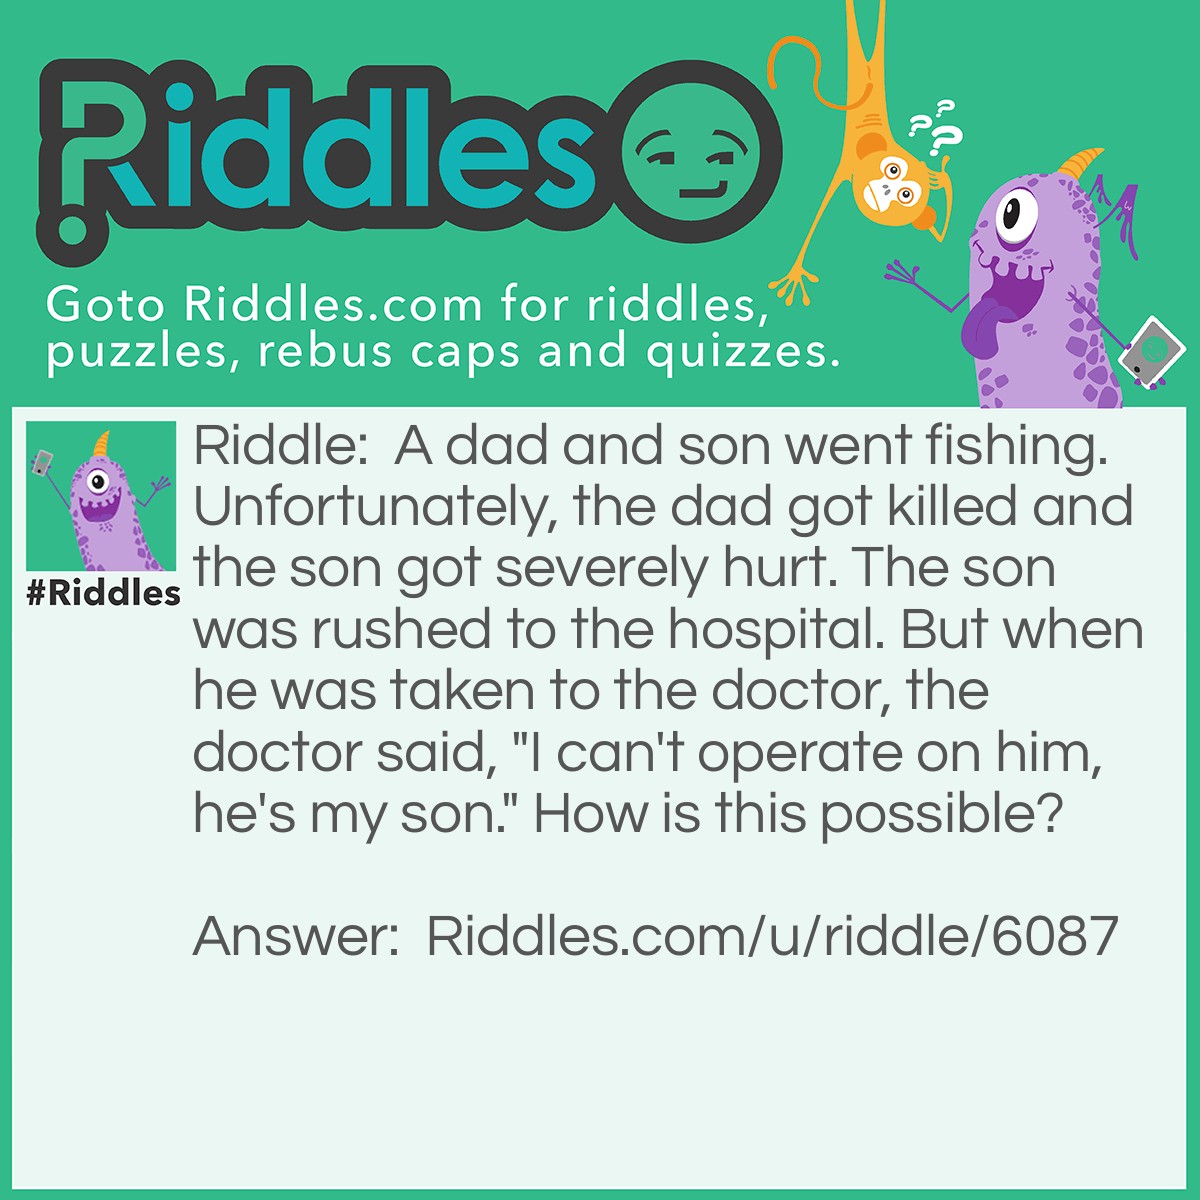 Riddle: A dad and son went fishing. Unfortunately, the dad got killed and the son got severely hurt. The son was rushed to the hospital. But when he was taken to the doctor, the doctor said, "I can't operate on him, he's my son." How is this possible? Answer: The son's mom is the doctor!